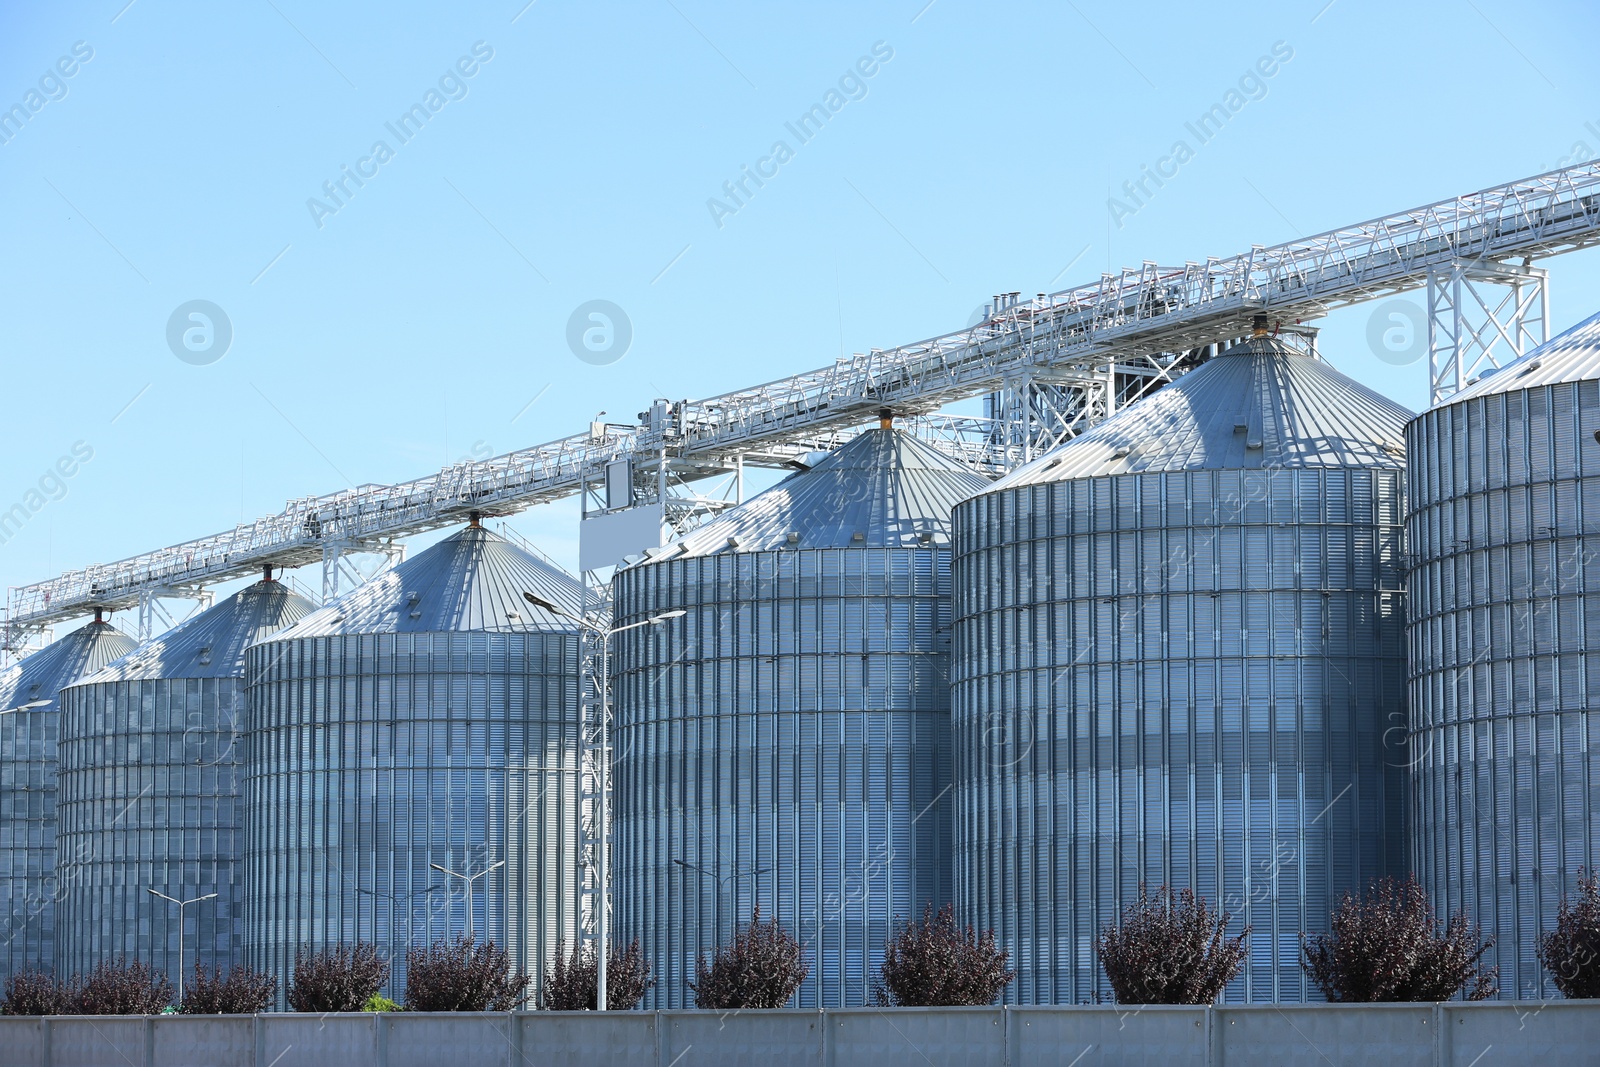 Photo of View of grain elevator against blue sky on sunny day. Cereal farming